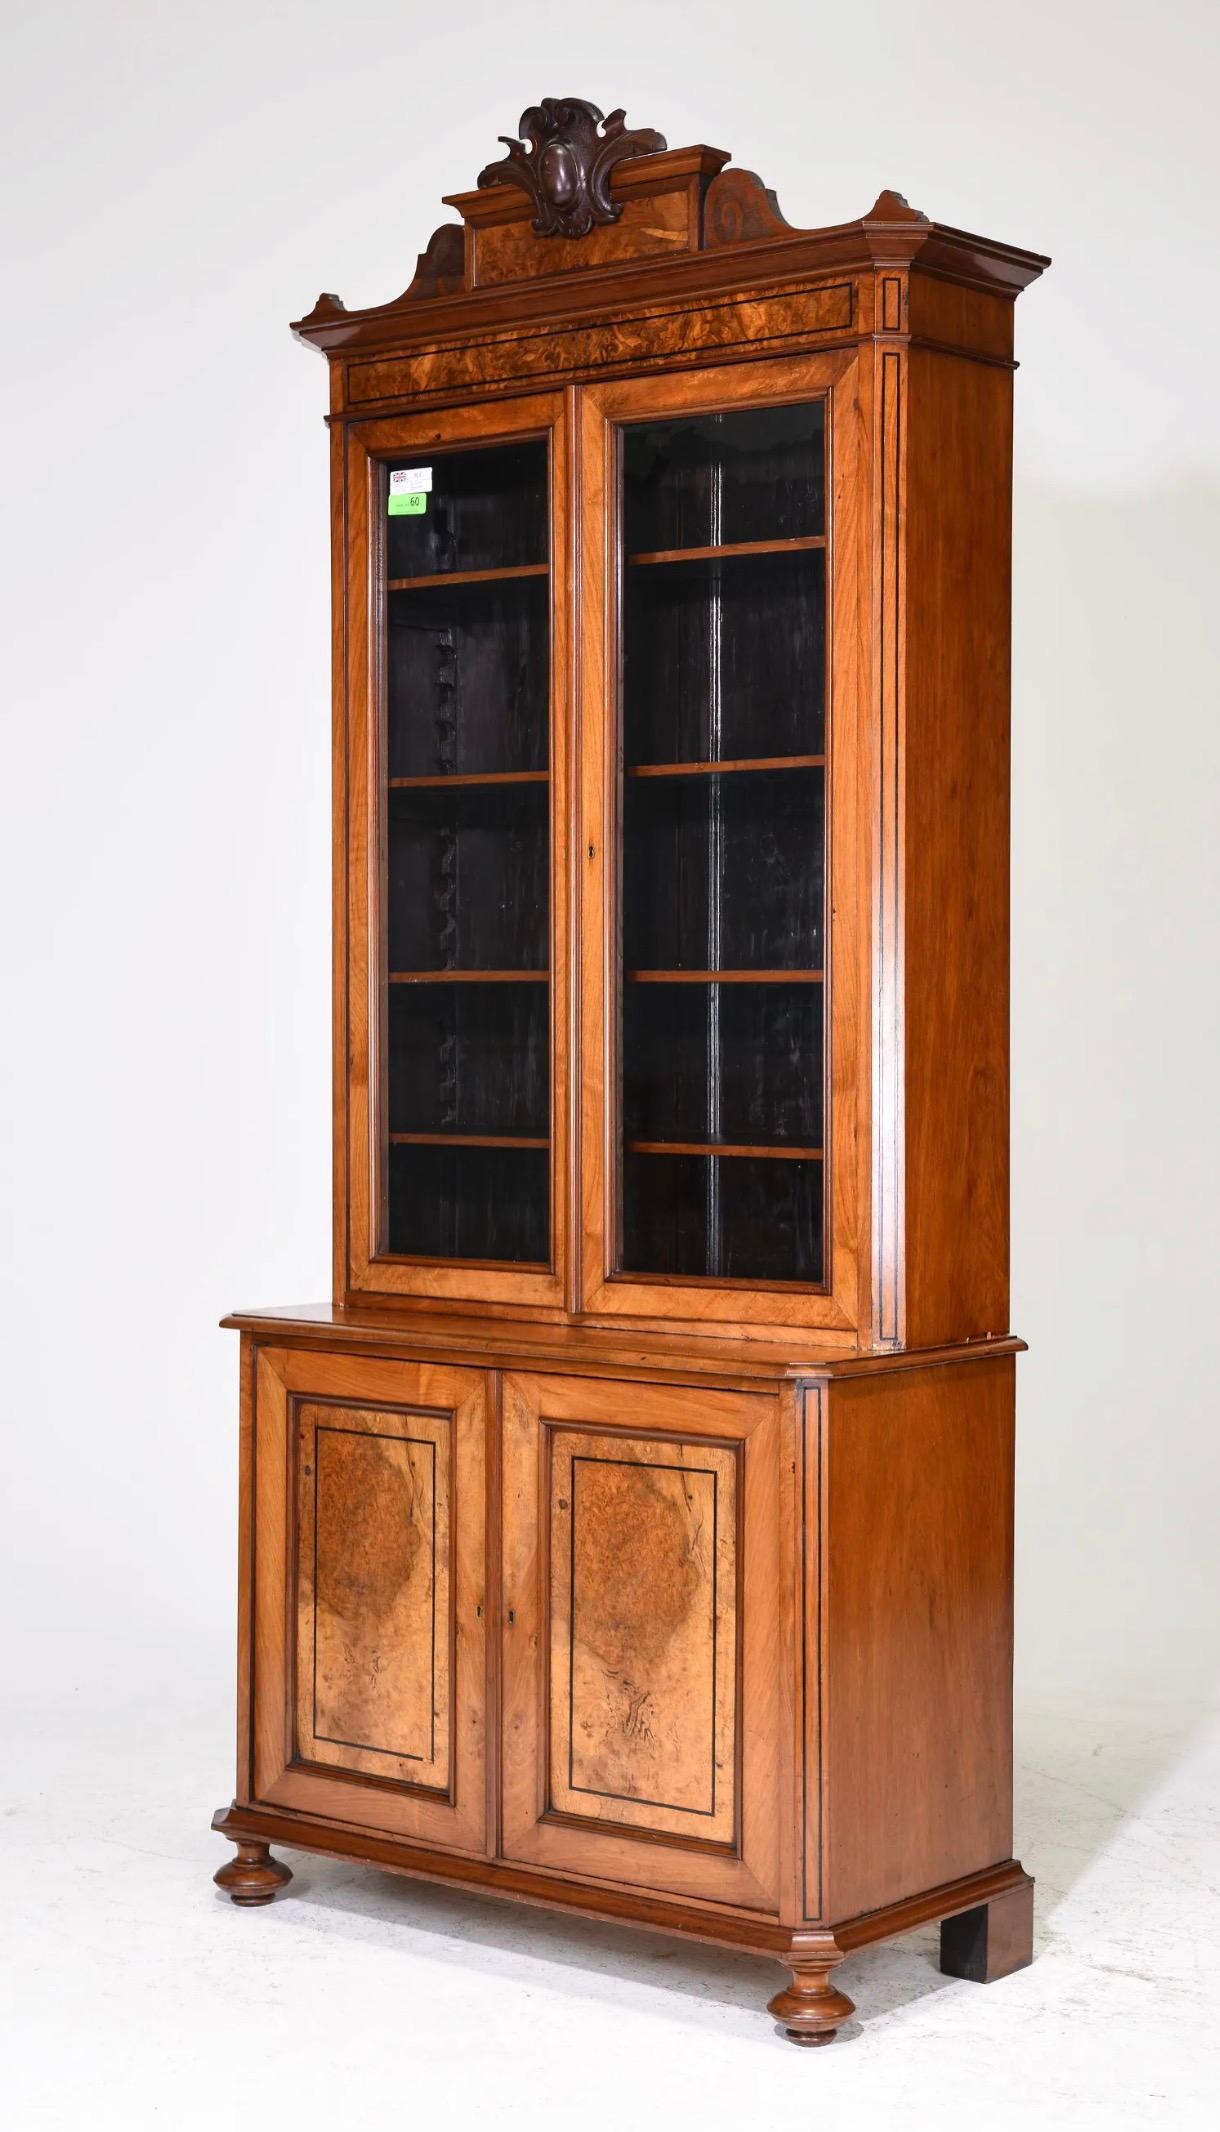 Beautiful English Walnut Stepback Bookcase / Cupboard. Burled door details with in-set detail at doors, carved crown with crest-like detail, original glass in upper doors, chamfered corner detail. 

90.5 in tall x 40 x 18, Shelf depth in top cabinet